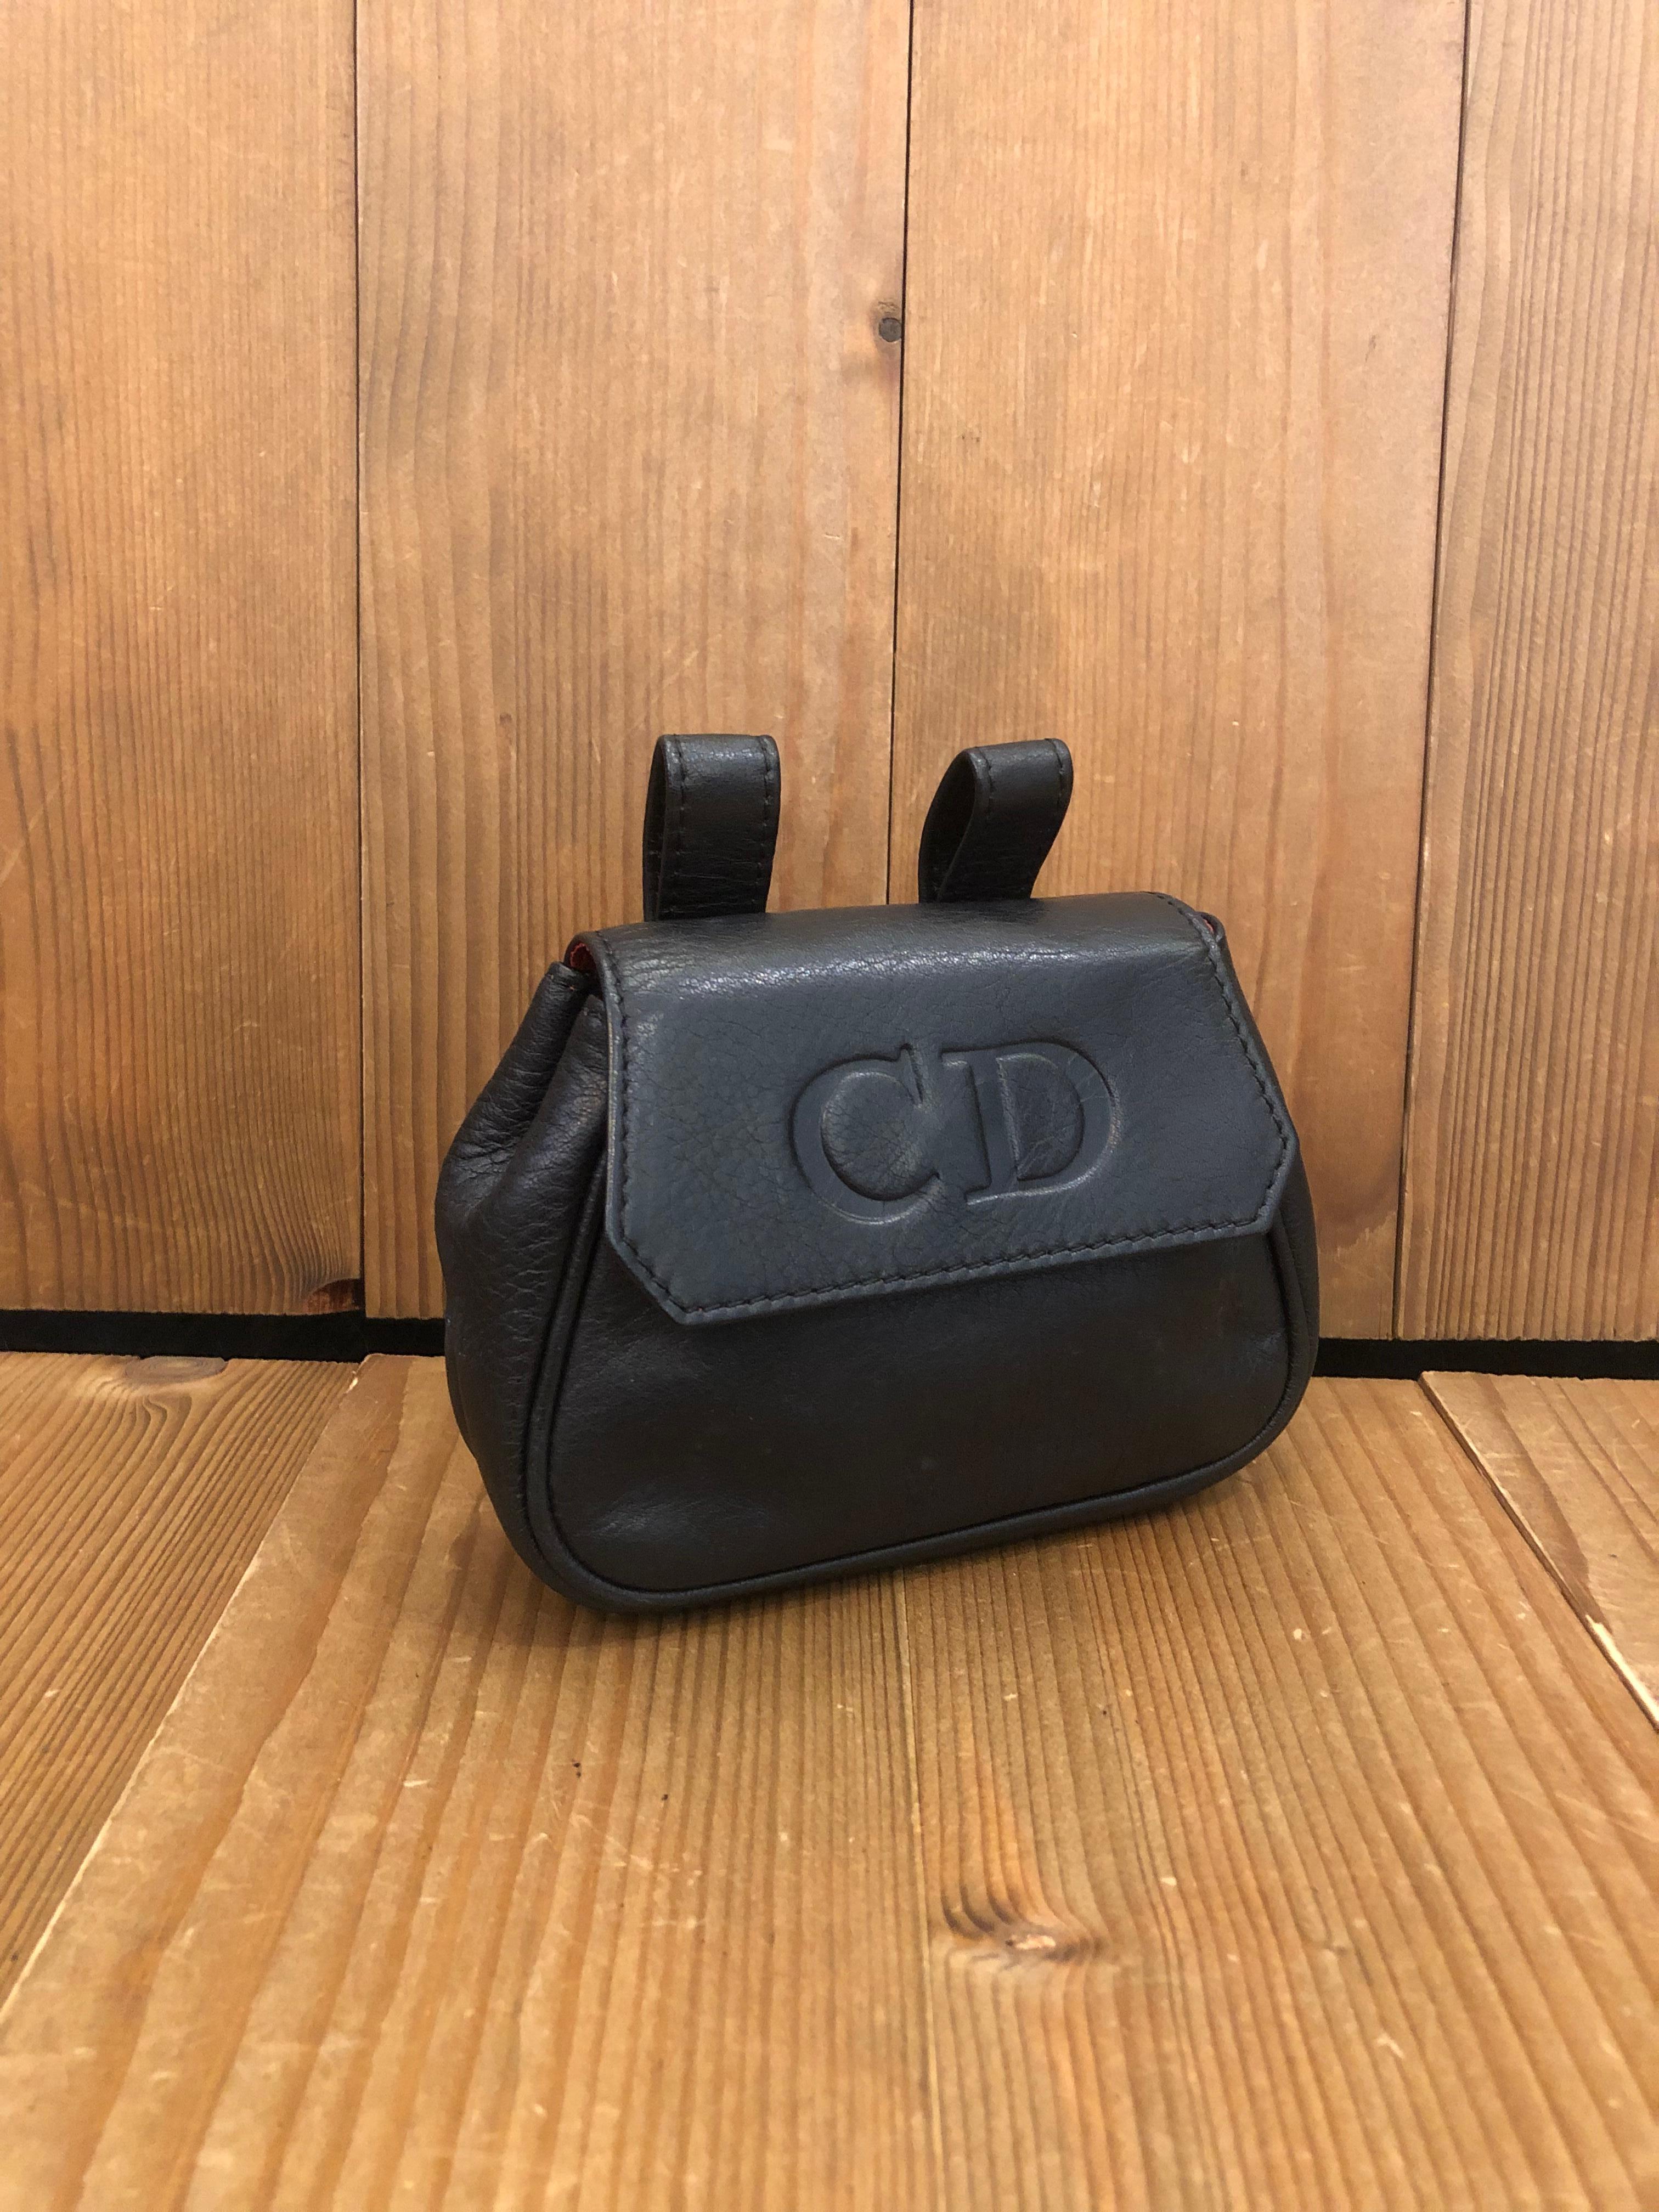 This vintage CHRISTIAN DIOR Mini belt bag is crafted of calfskin leather in black. Front flap magnetic snap closure opens to a red lambskin interior. Made in Spain. Bag measures approximately 3.5/4.5 x 4 x 1.25 inches. Comes with replacement belt